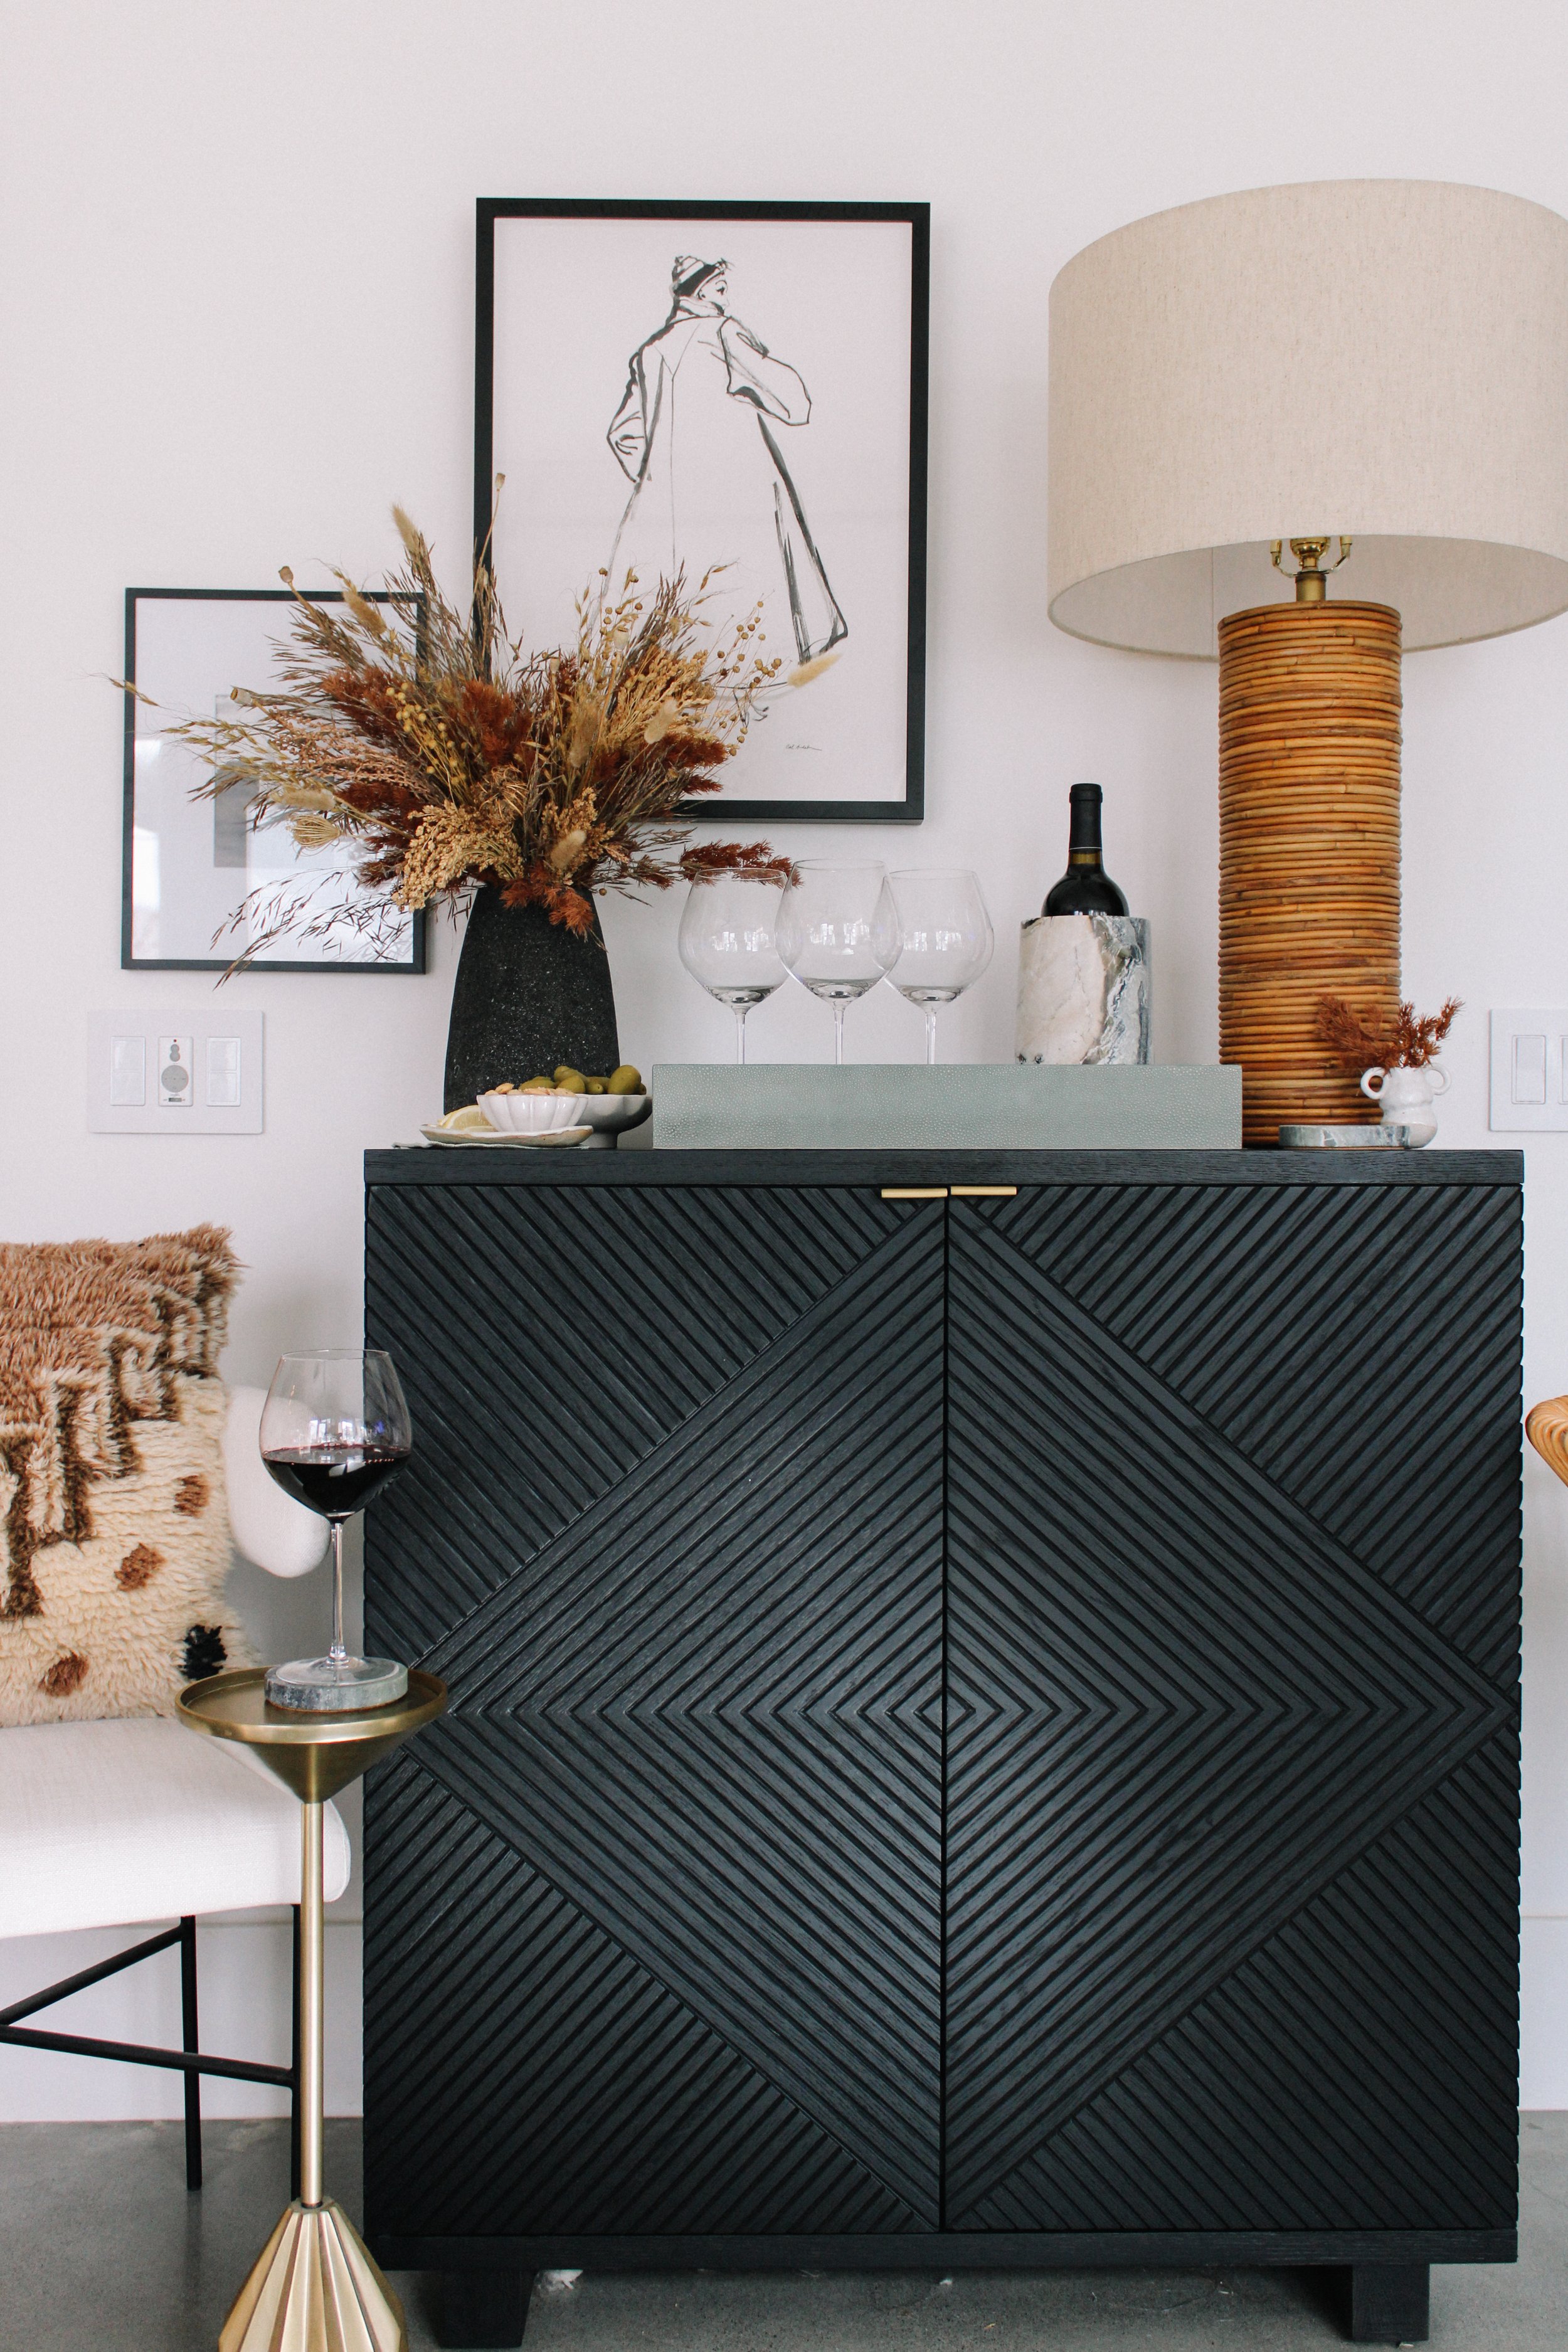 Styling Tips For Your Bar Cabinet Or